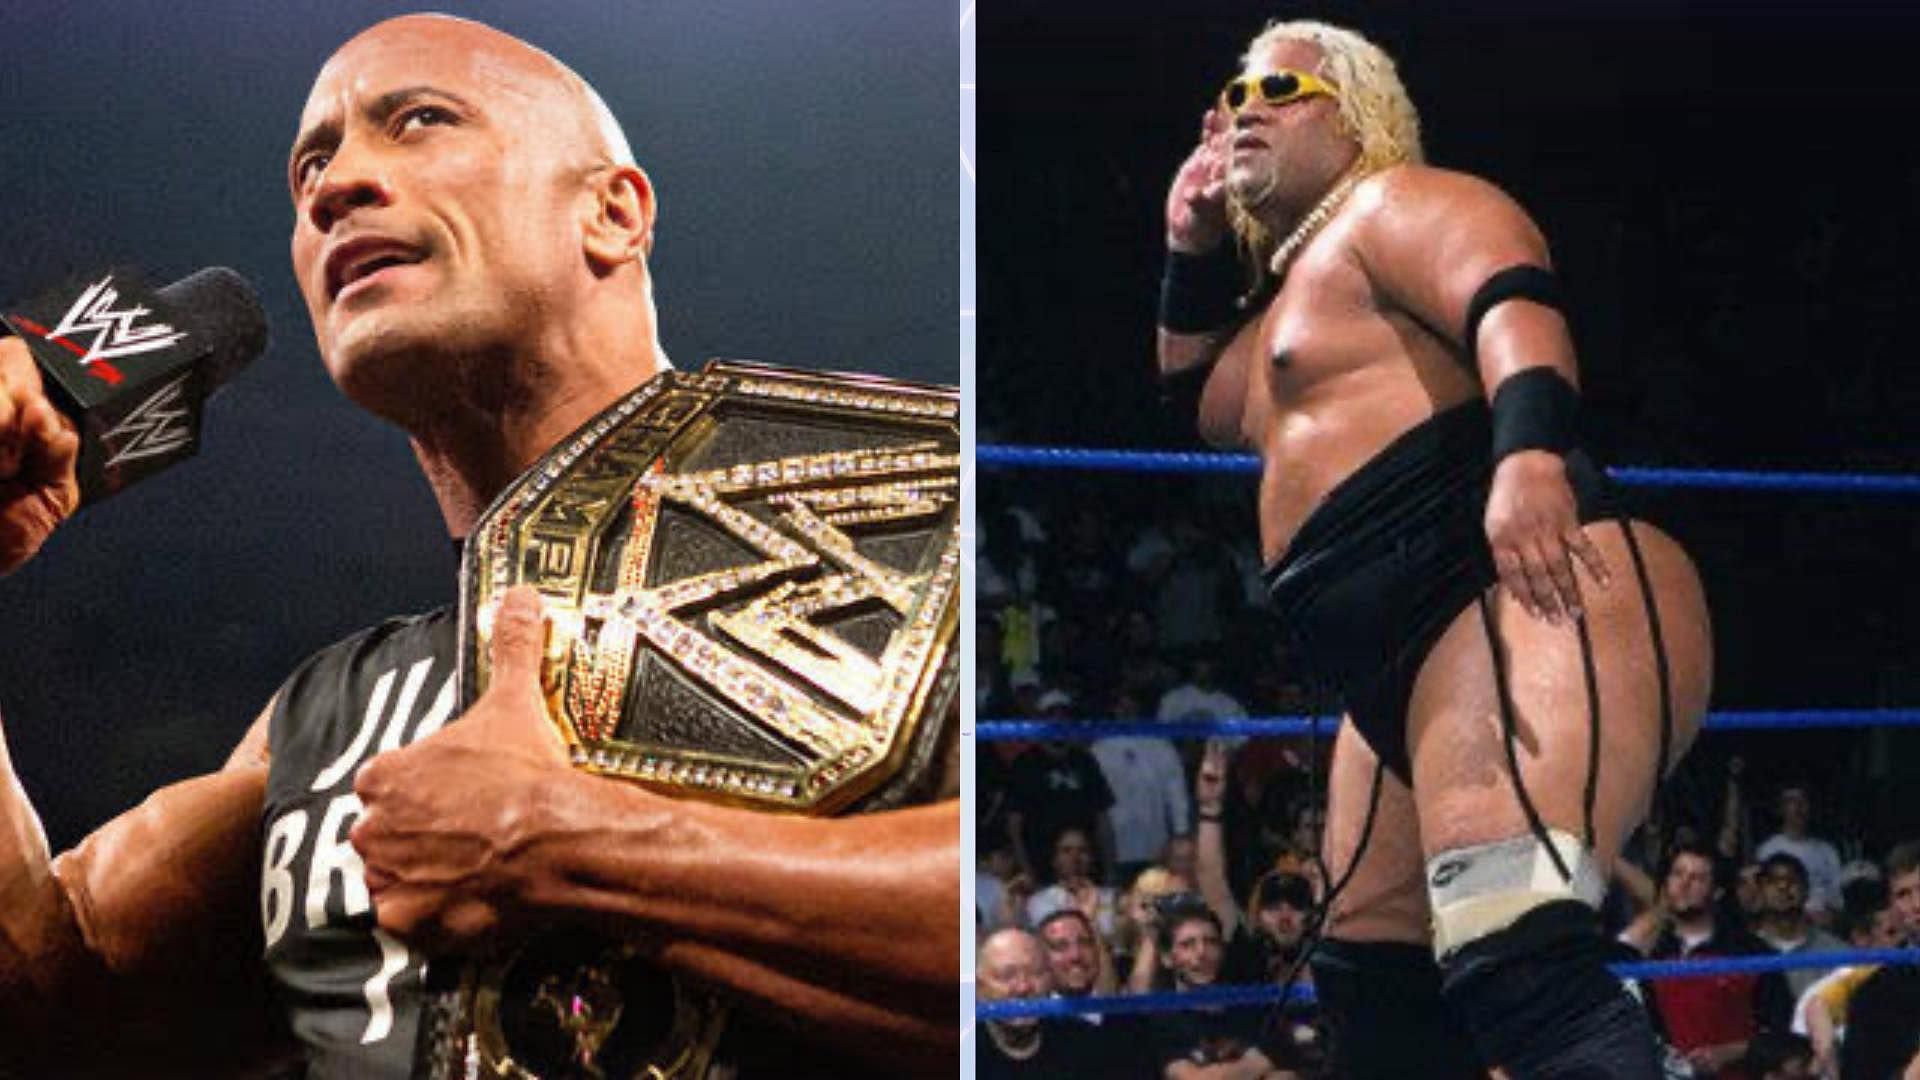 The Rock and Rikishi in picture